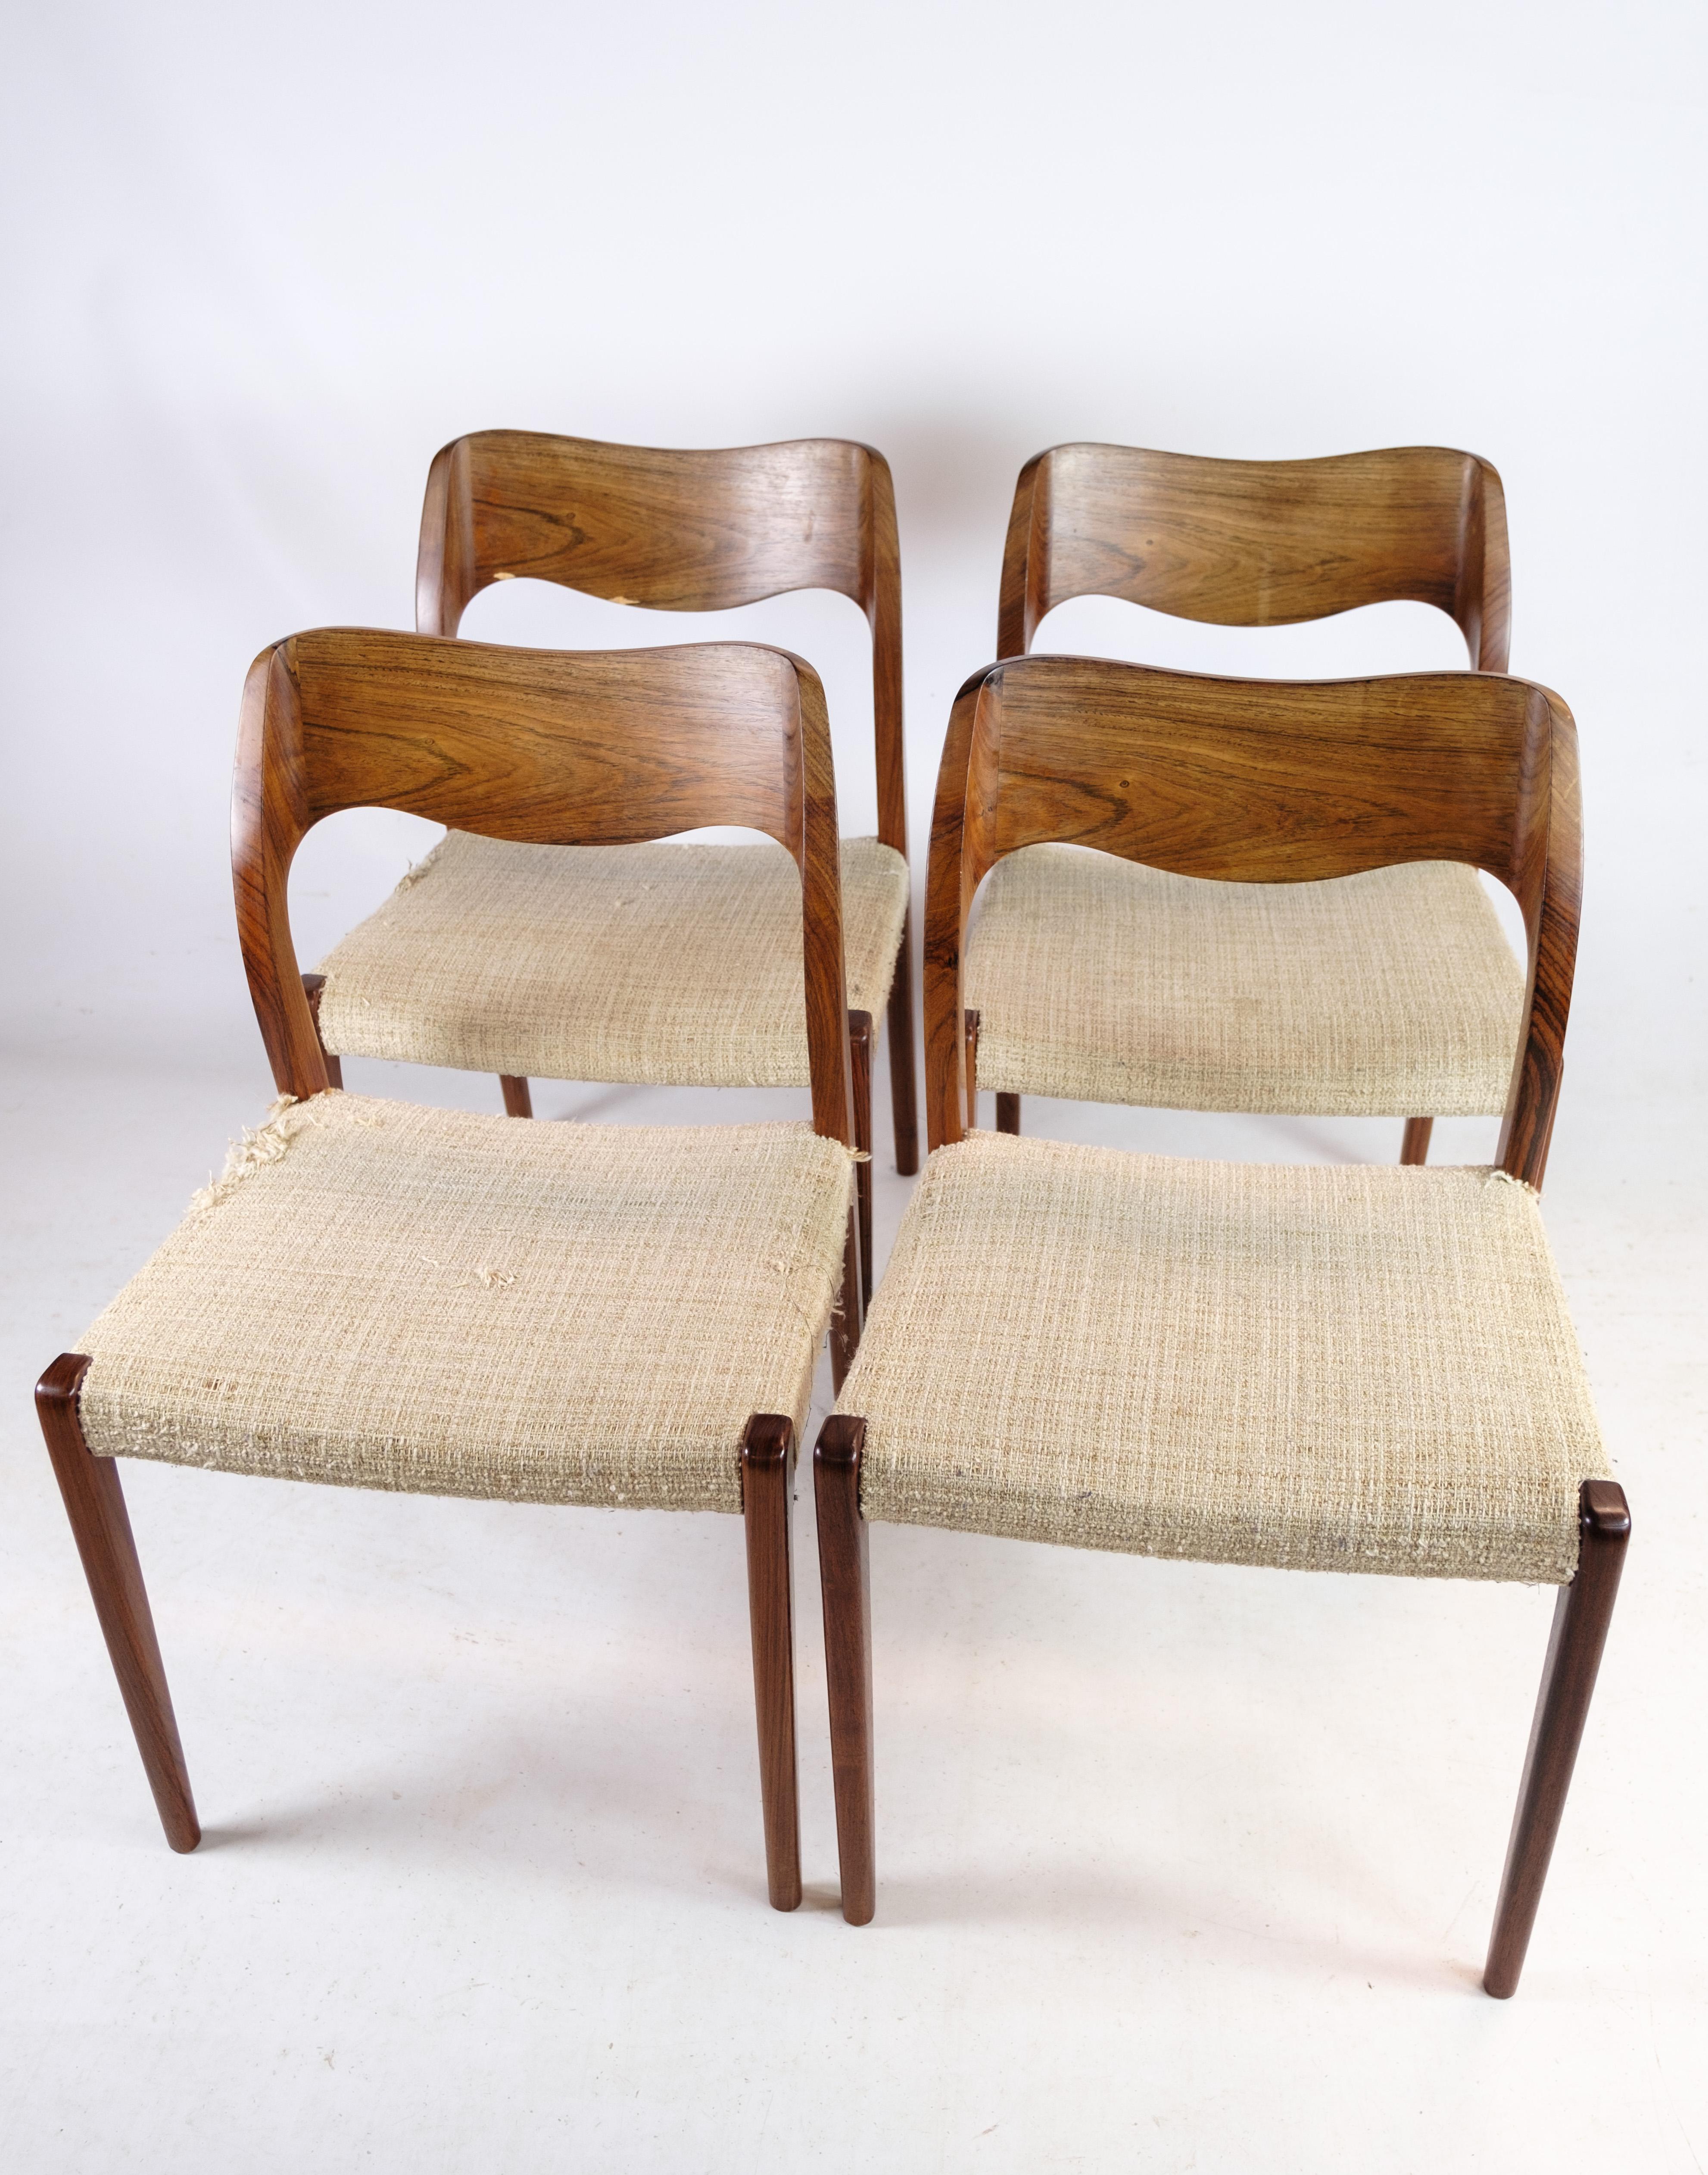 Set of 4 dining room chairs, model 71, designed by N.O Møller designed in 1951. Stands with very fine rosewood frame, and wicker seat. Produced by J.L. Møllers Møbelfabrik.
Dimensions in cm: H: 77.5 W: 50 D: 42 SH: 45

This product will be